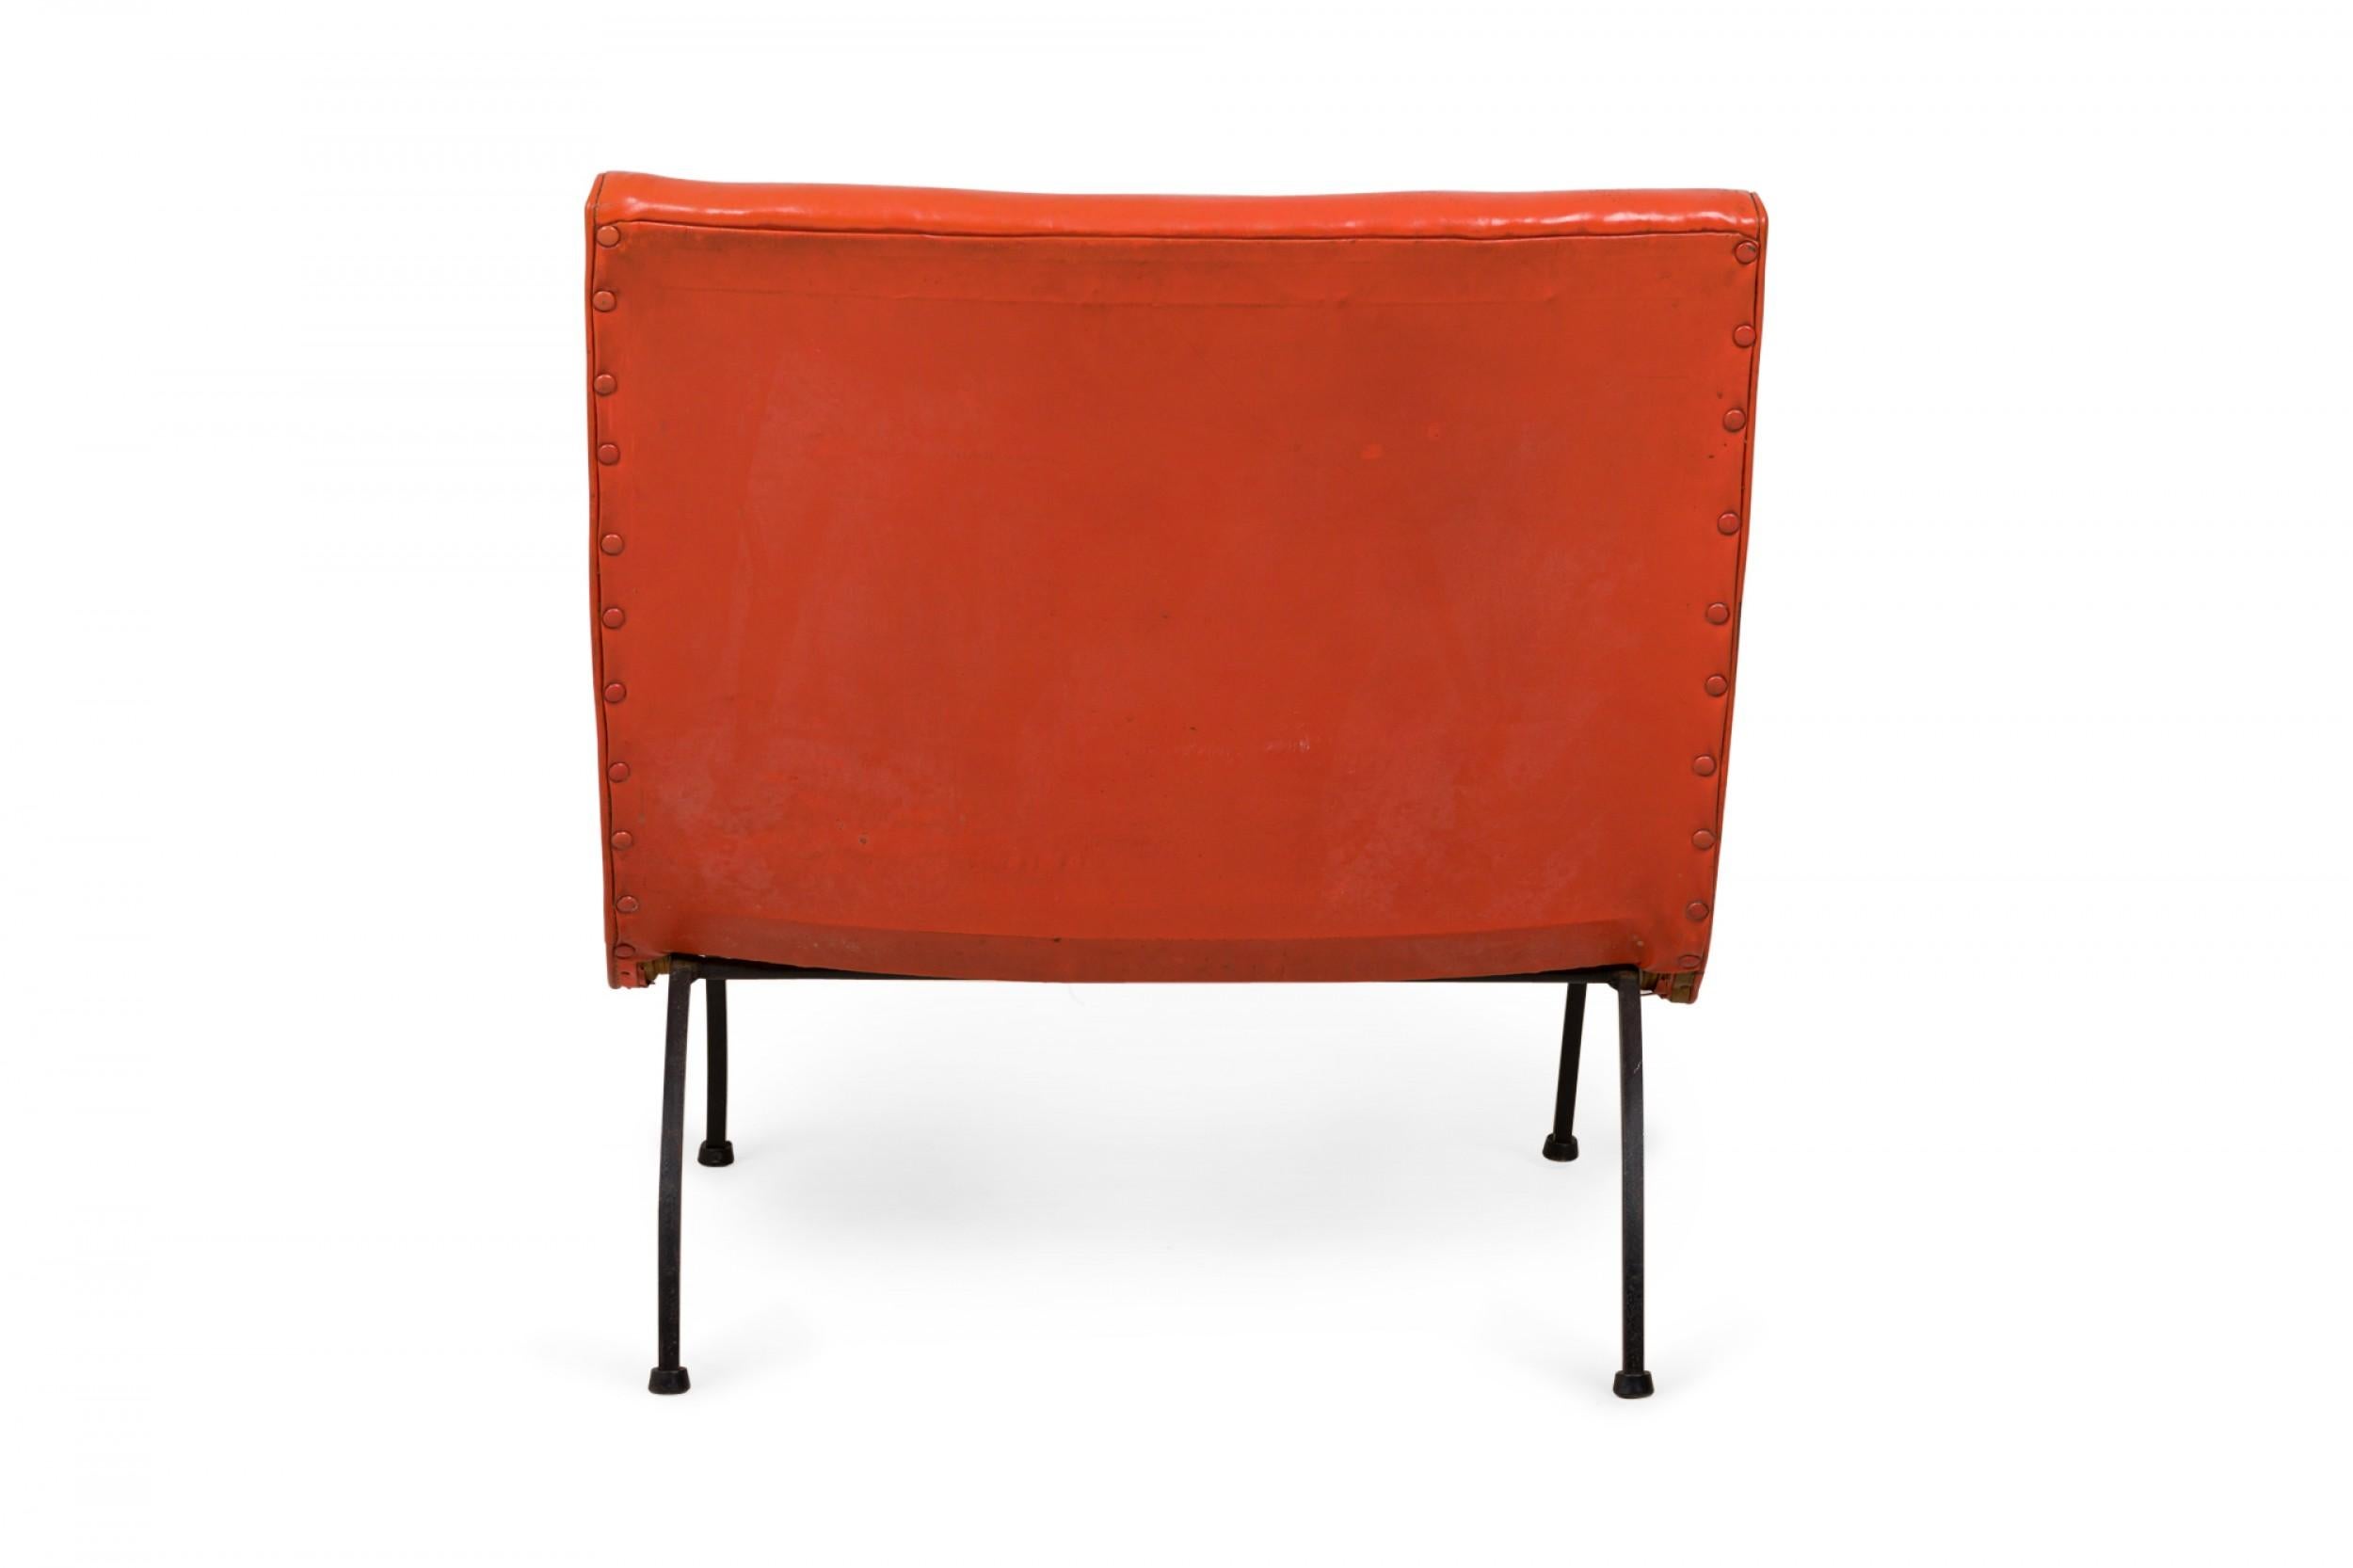 American Milo Baughman Orange Tufted Vinyl Upholstery and Iron Scoop Lounge / Side Chair For Sale